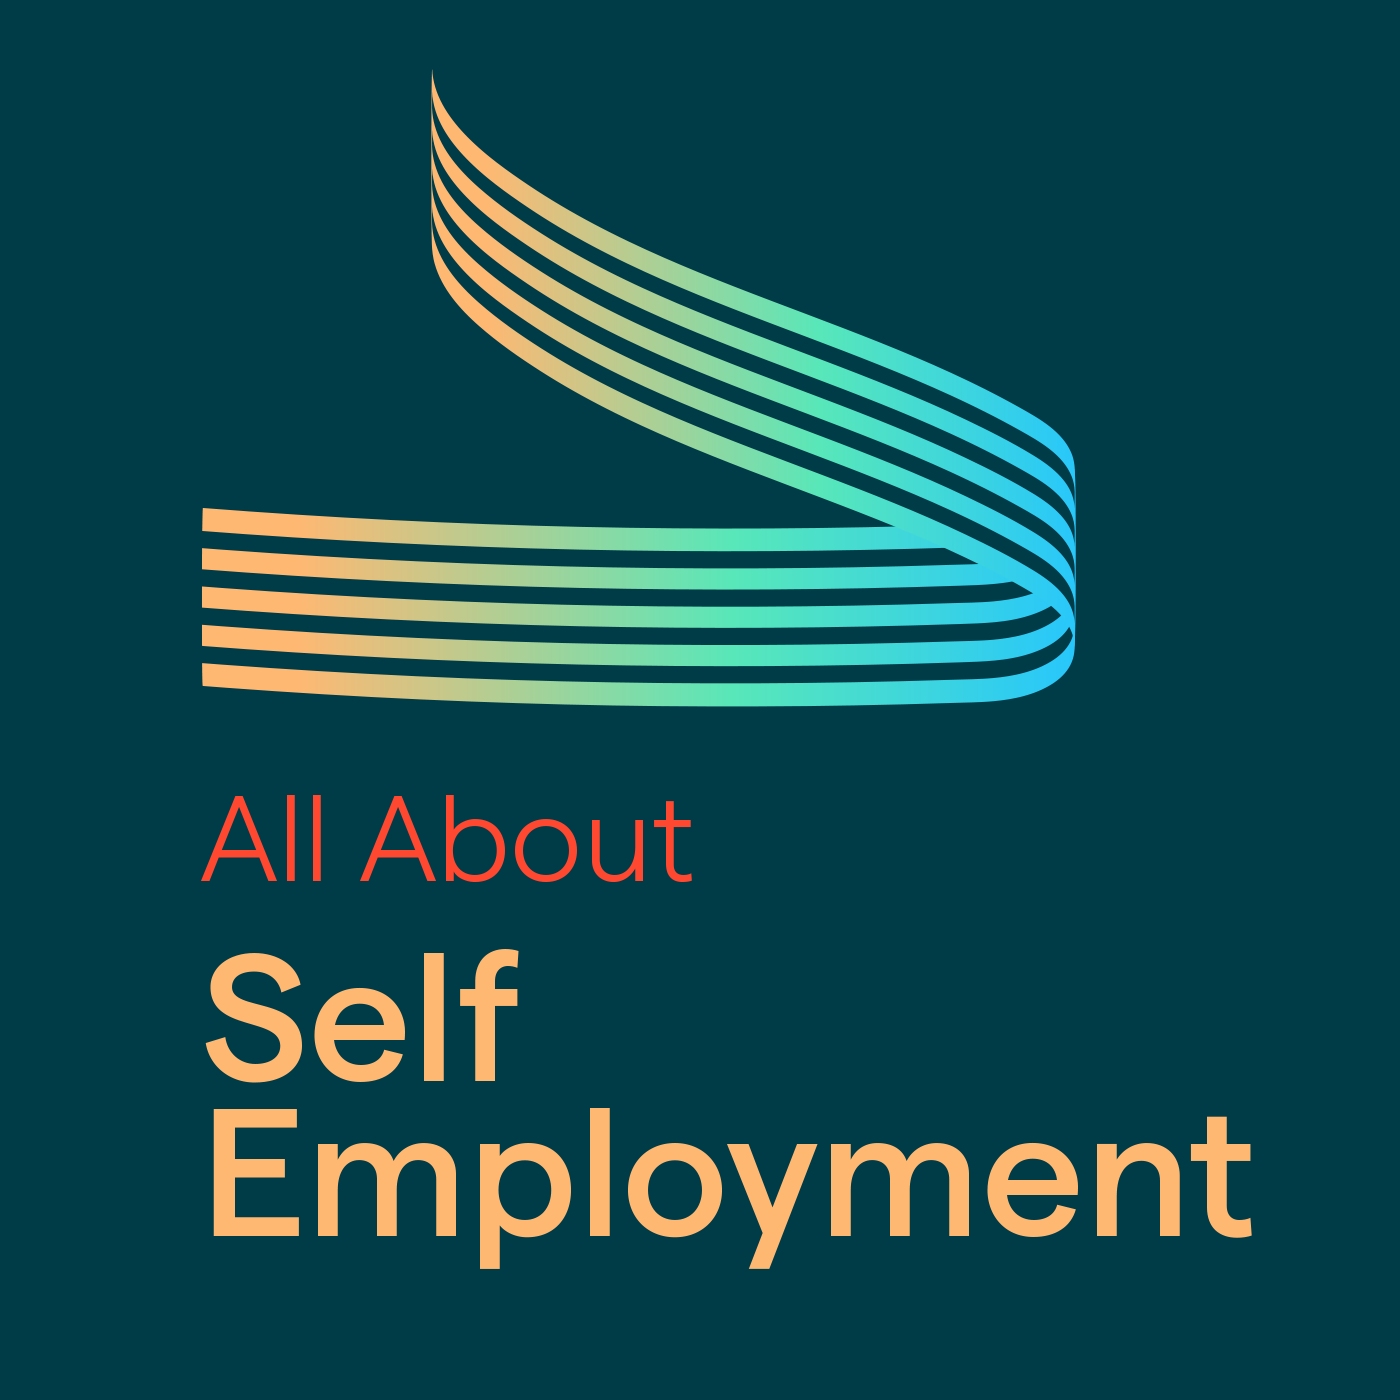 Attitudes To Self-Employment Are Contributing To The Cost Of Living Crisis